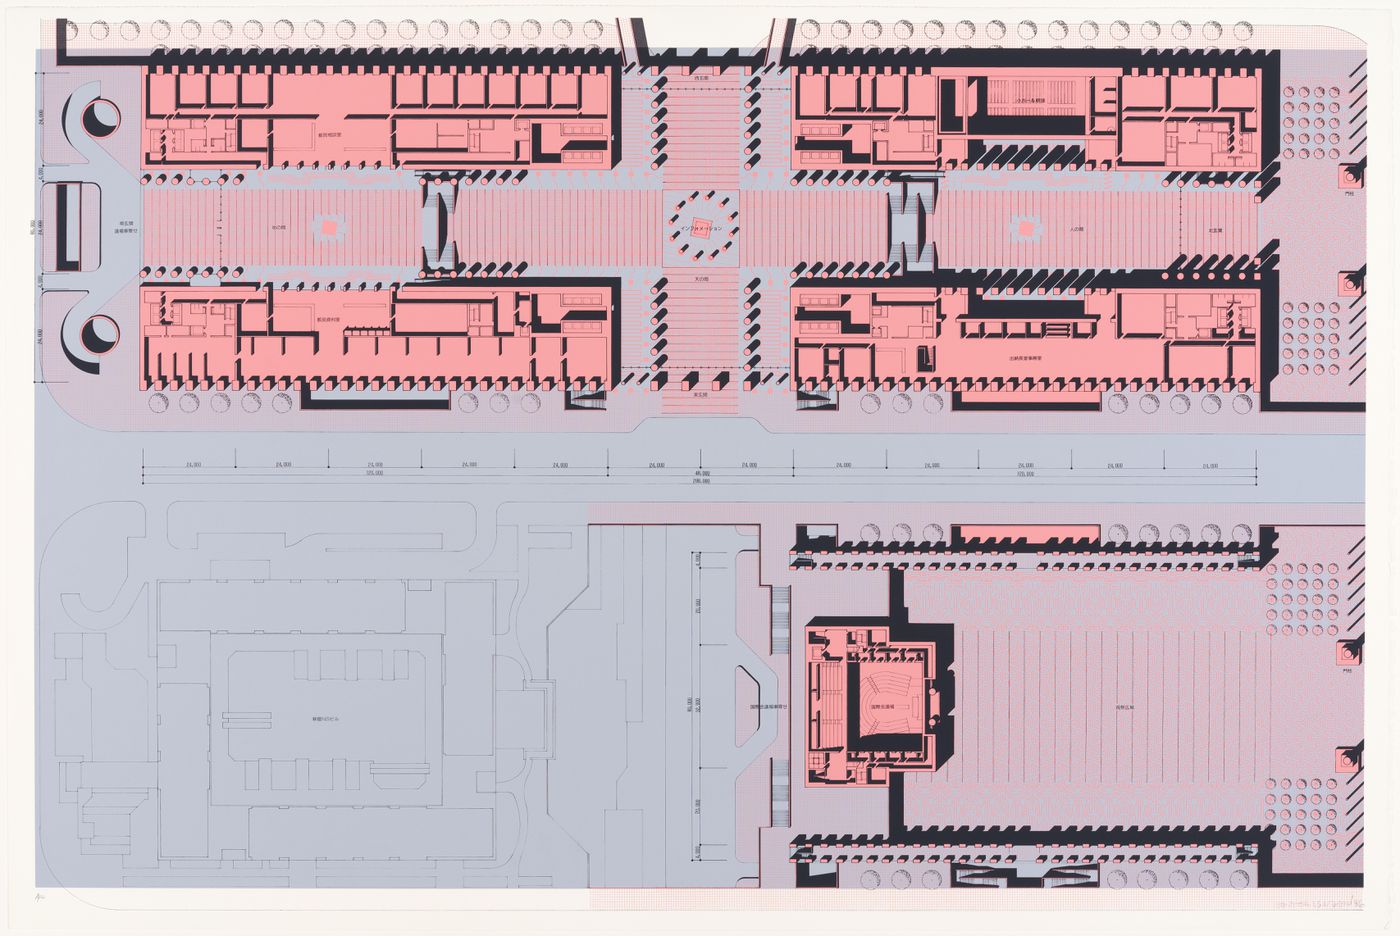 Second floor plan of complex for the Tokyo City Hall competition entry